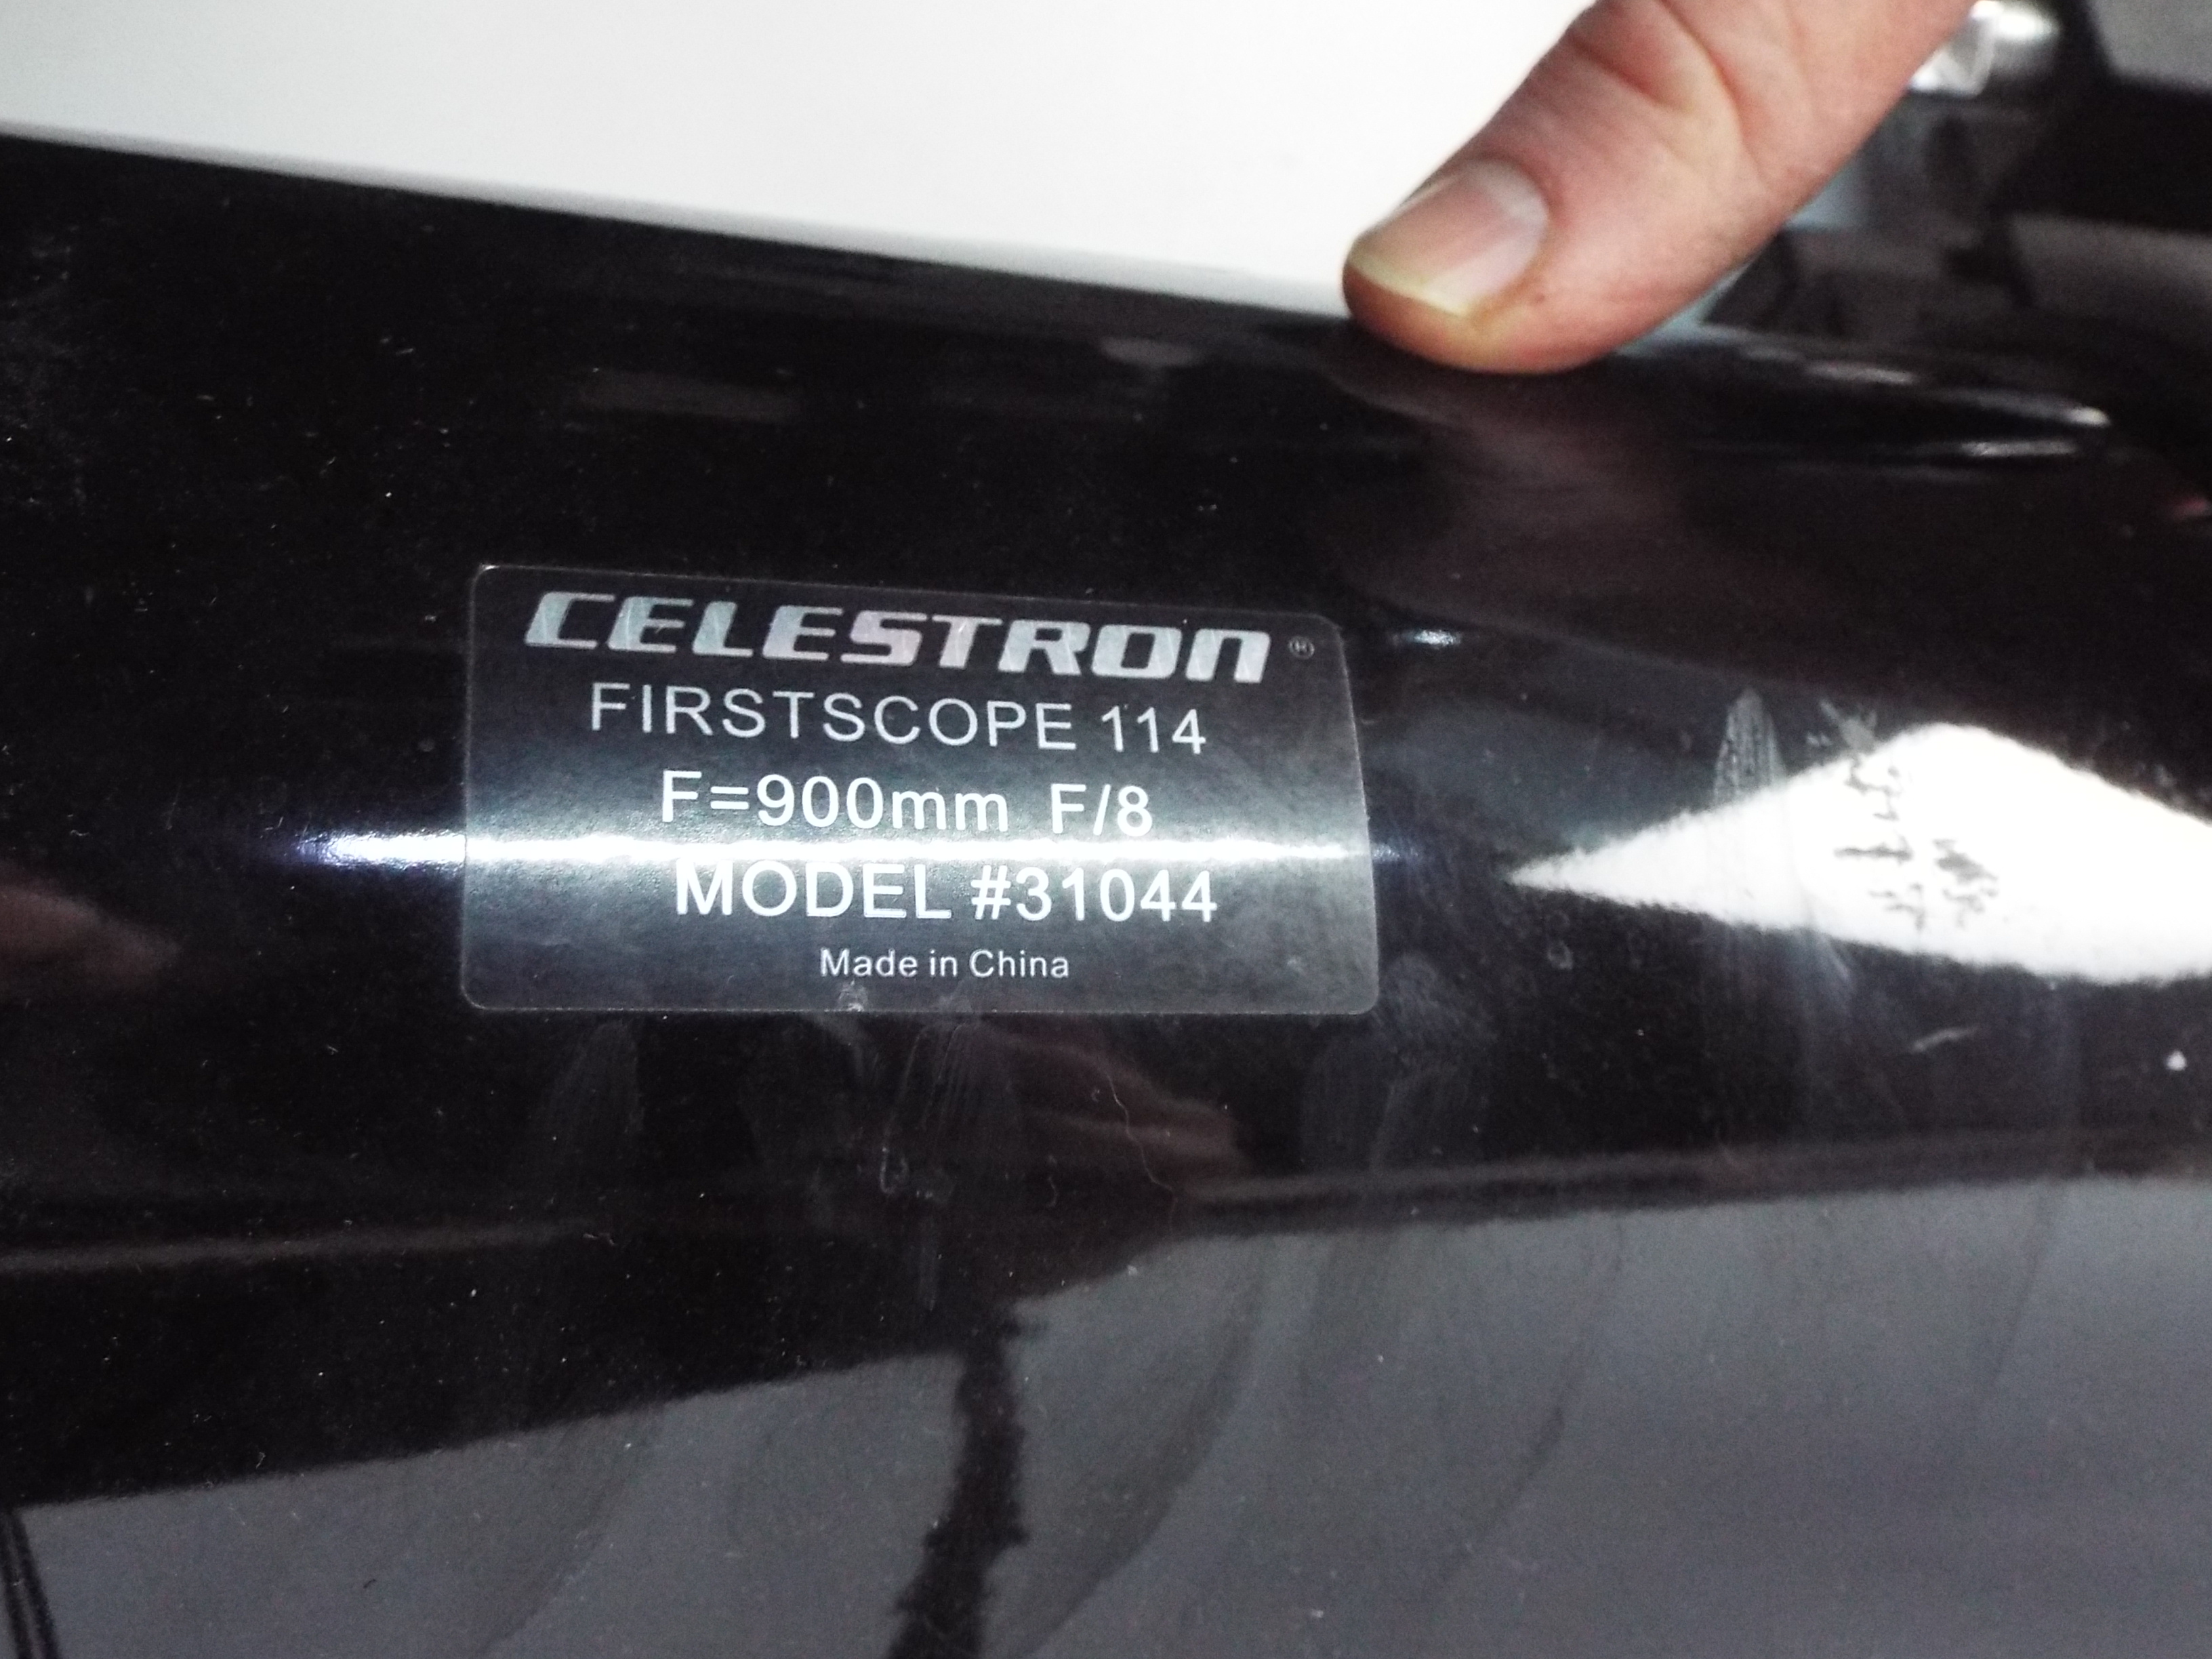 A Celestron Firstscope 114 celestial telescope with tripod stand. - Image 5 of 6